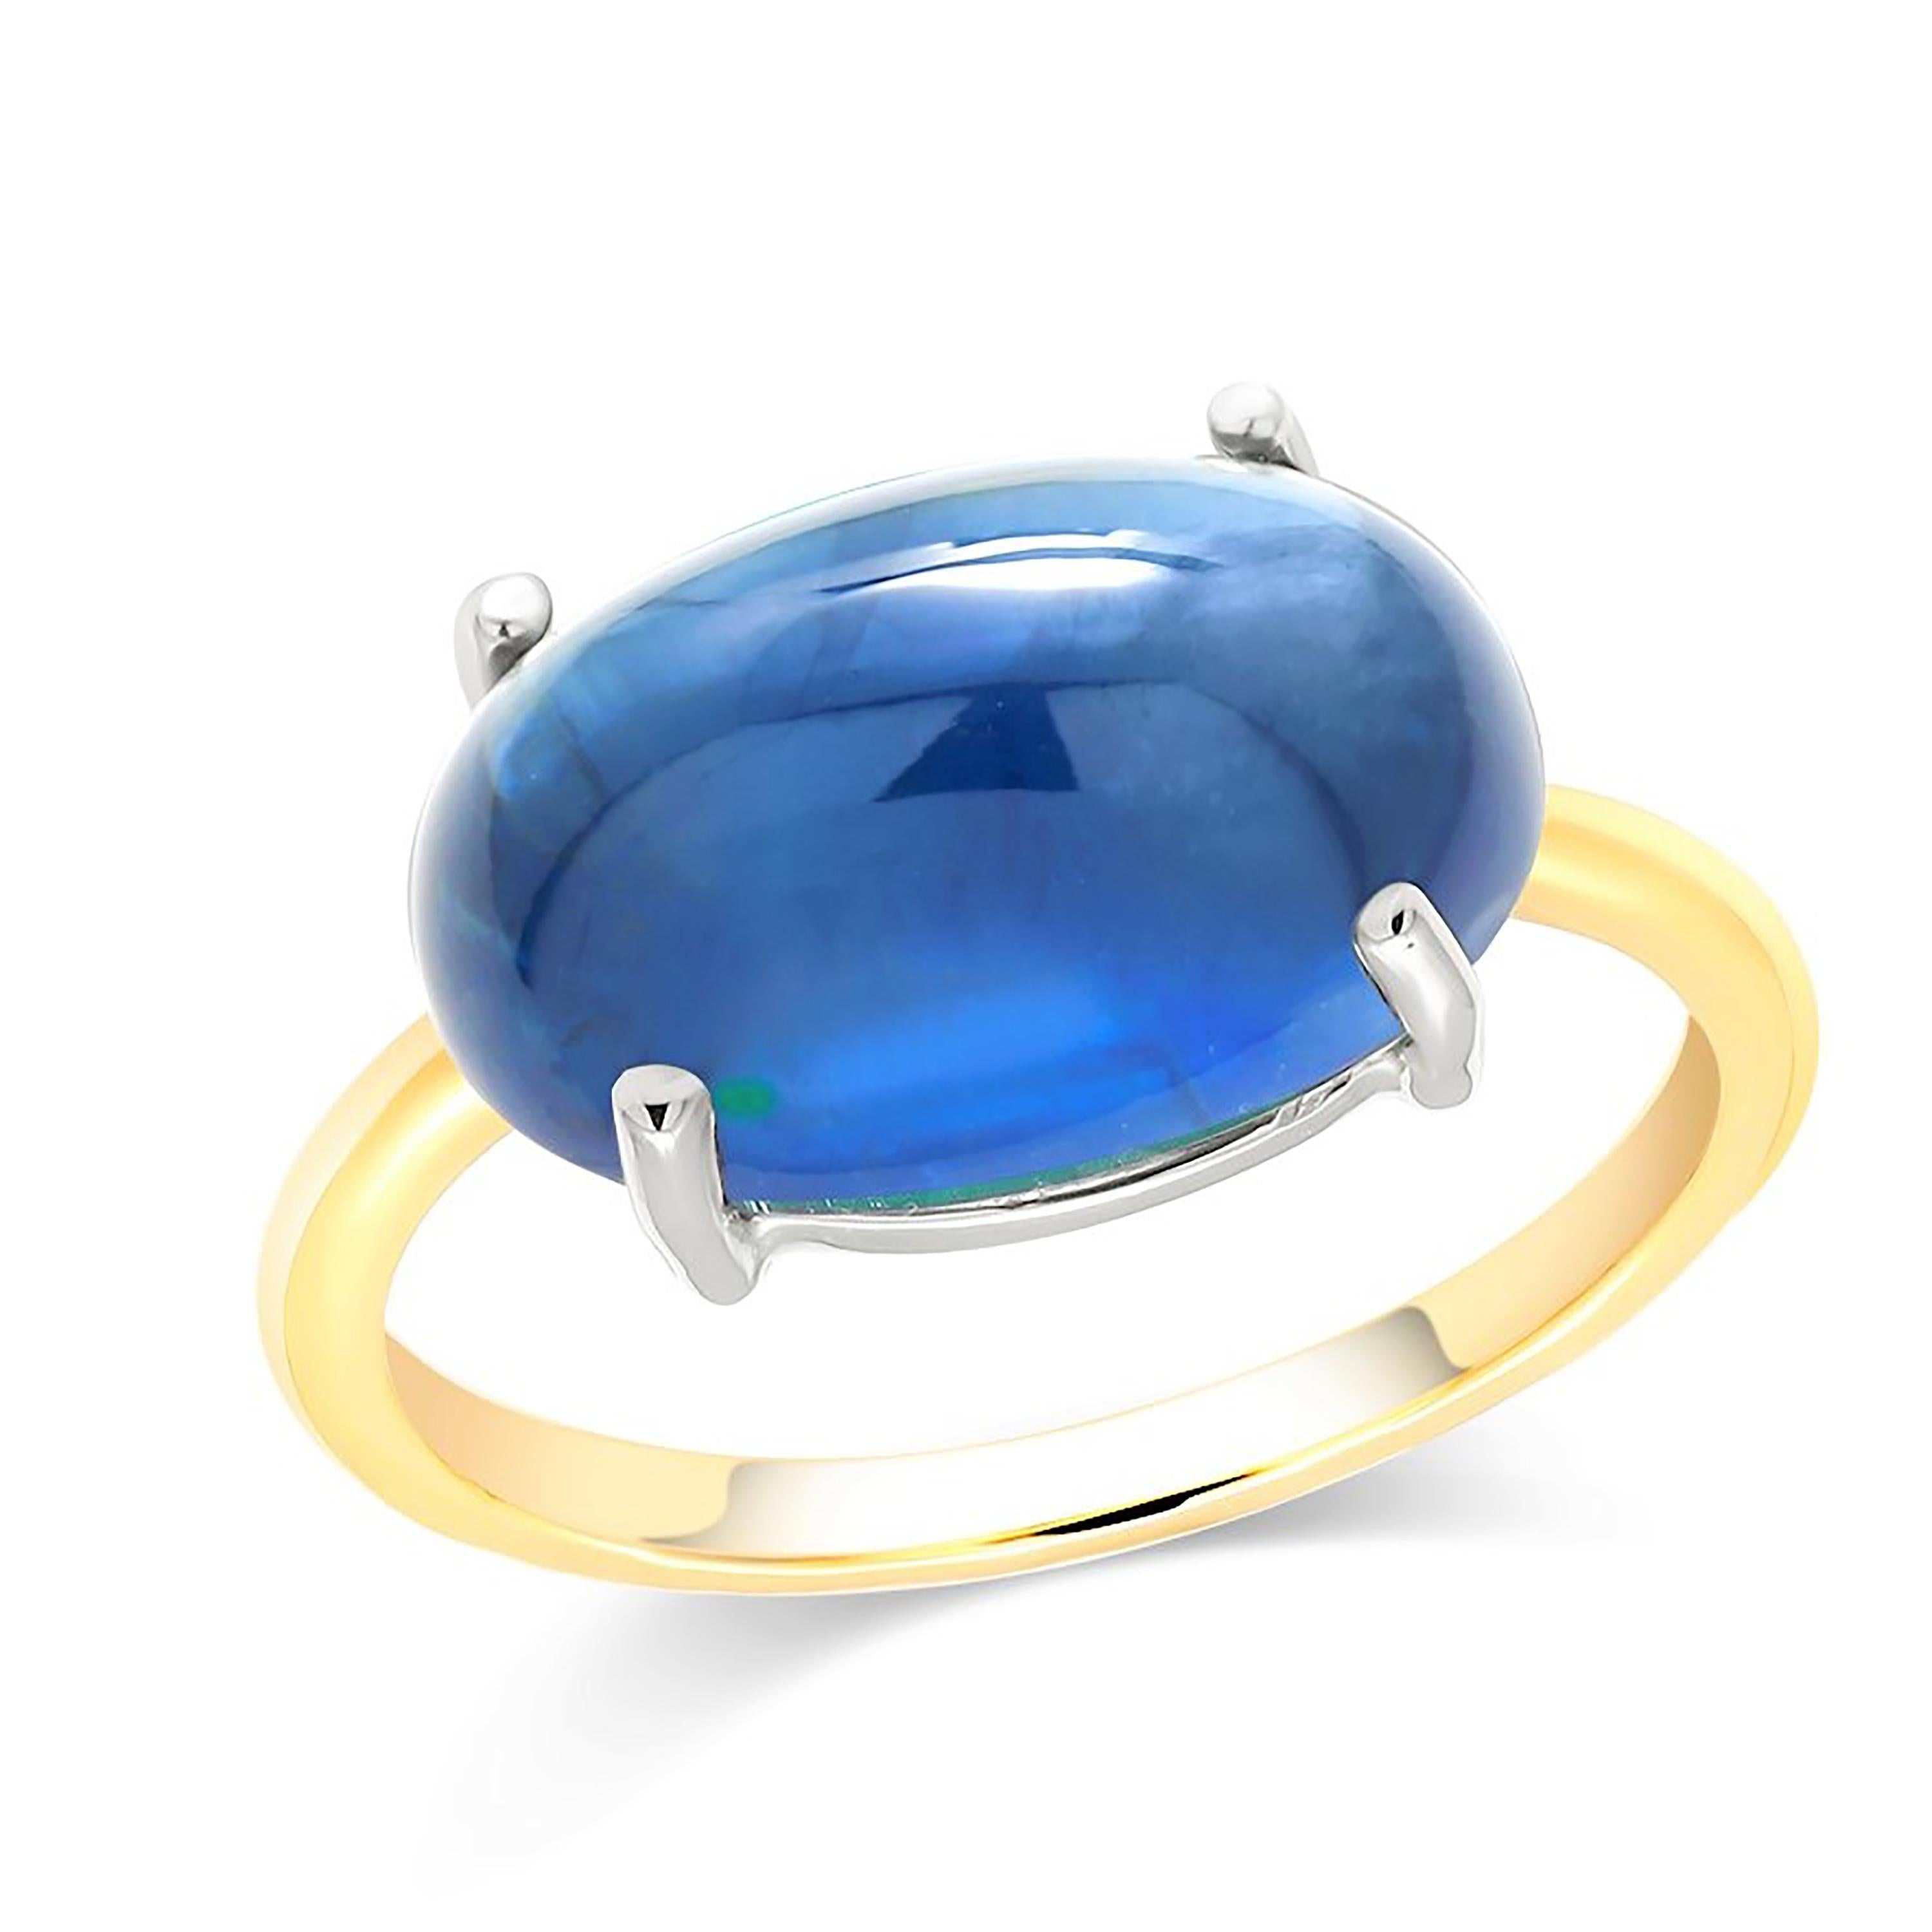 Oval Cut Ceylon Cabochon Sapphire White Yellow Gold Cocktail Gold Ring